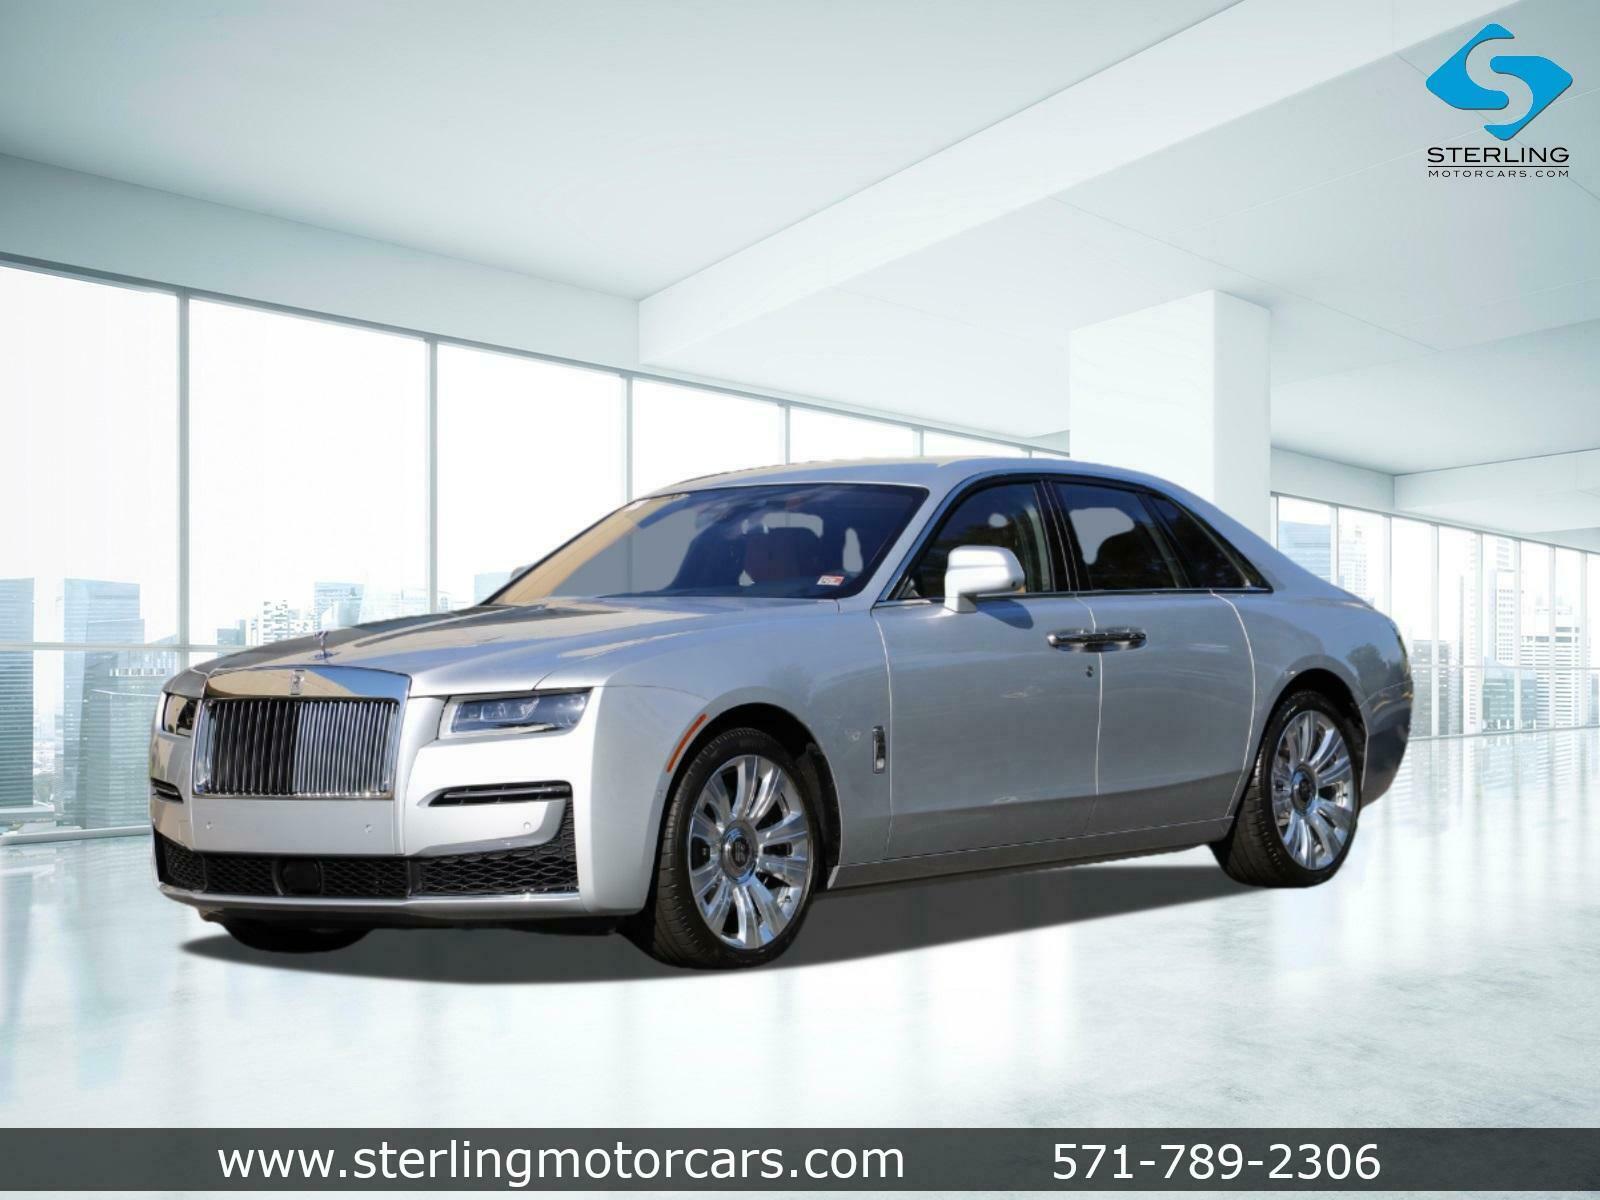 2021 Rolls-royce Ghost Sedan 2021 Rolls-royce Ghost, Silver With 23 Miles Available Now!